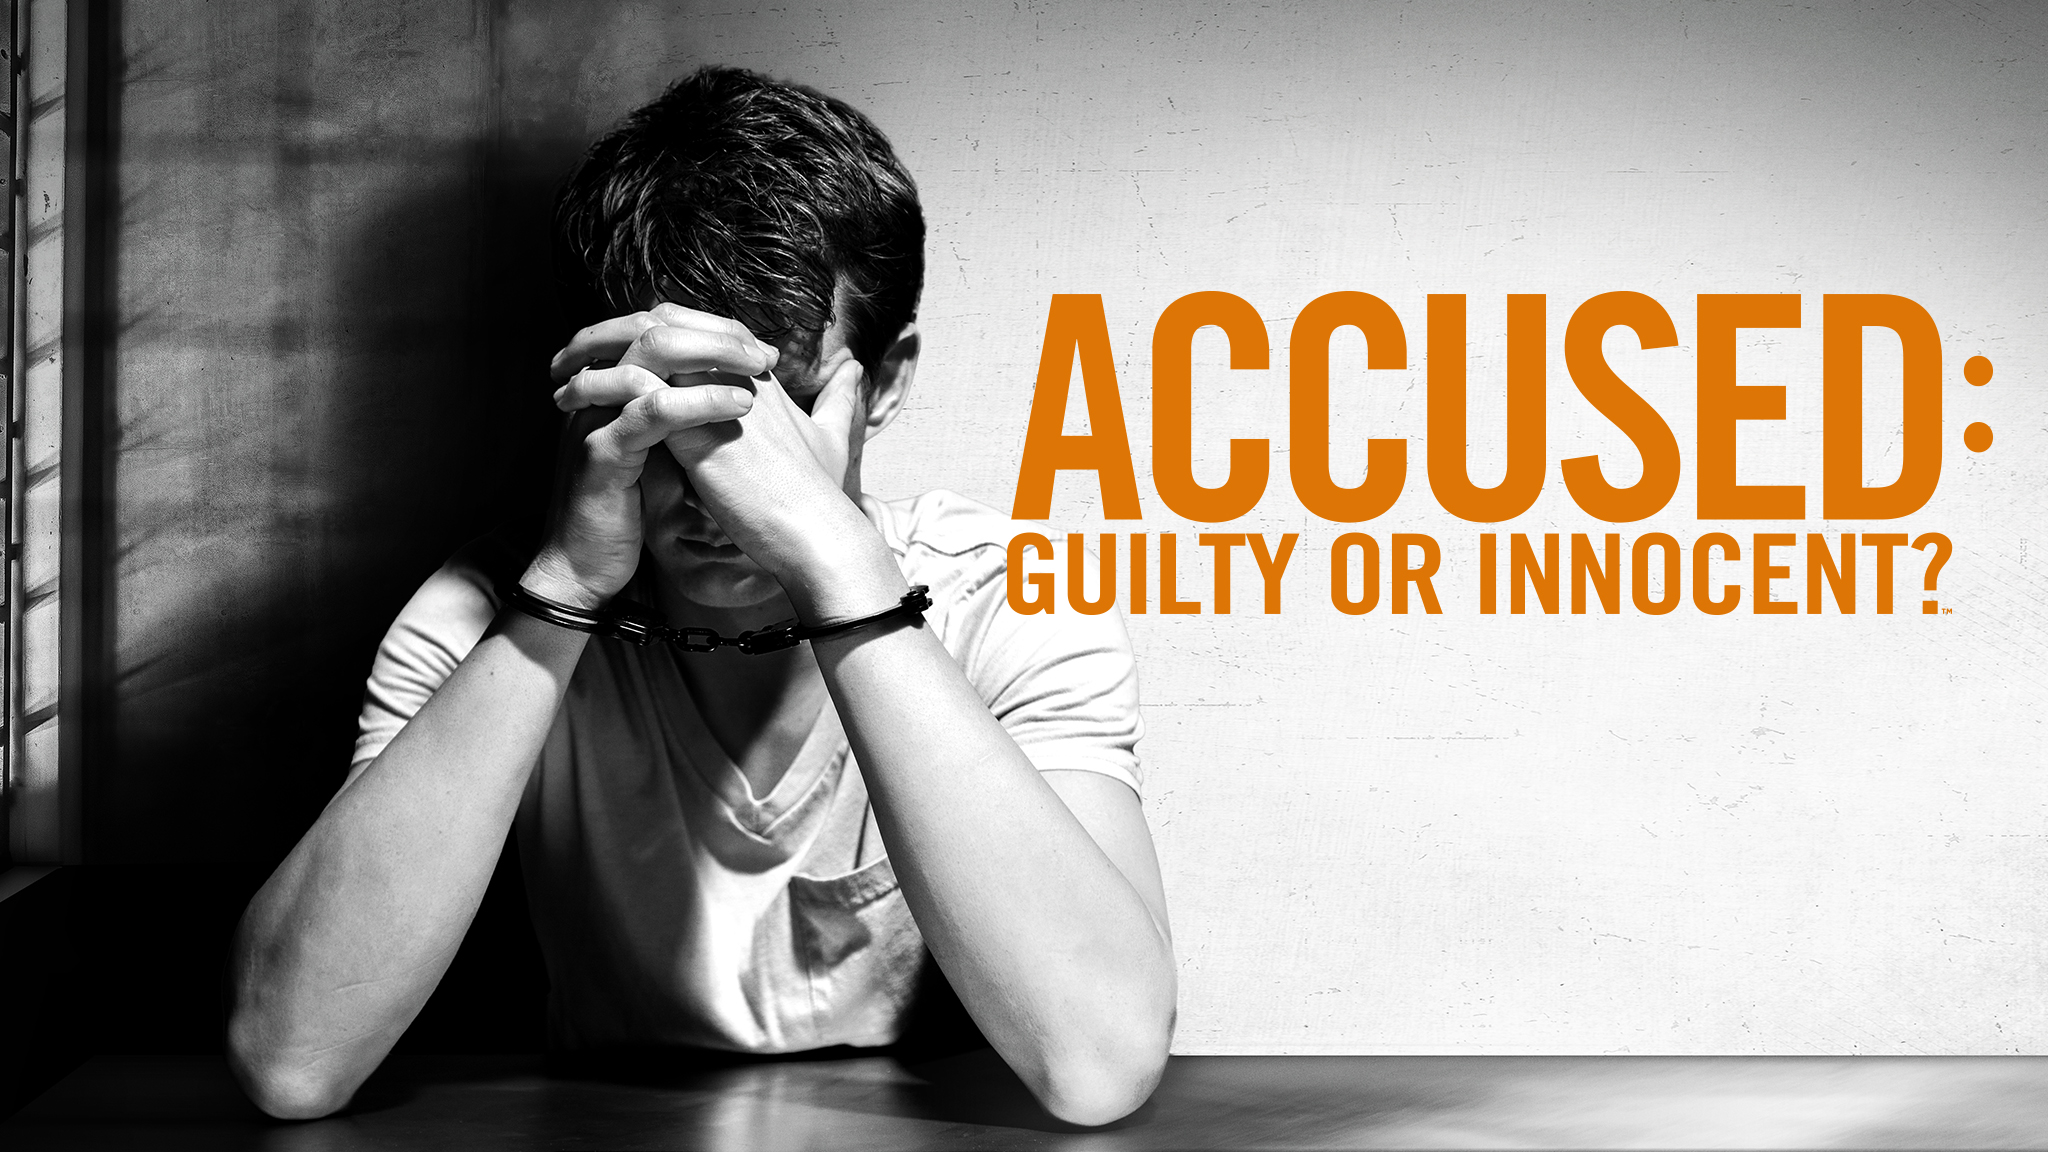 A&E's Groundbreaking Documentary Series "Accused: Guilty or Innocent?" Returns for Season Three on Thursday, May 26